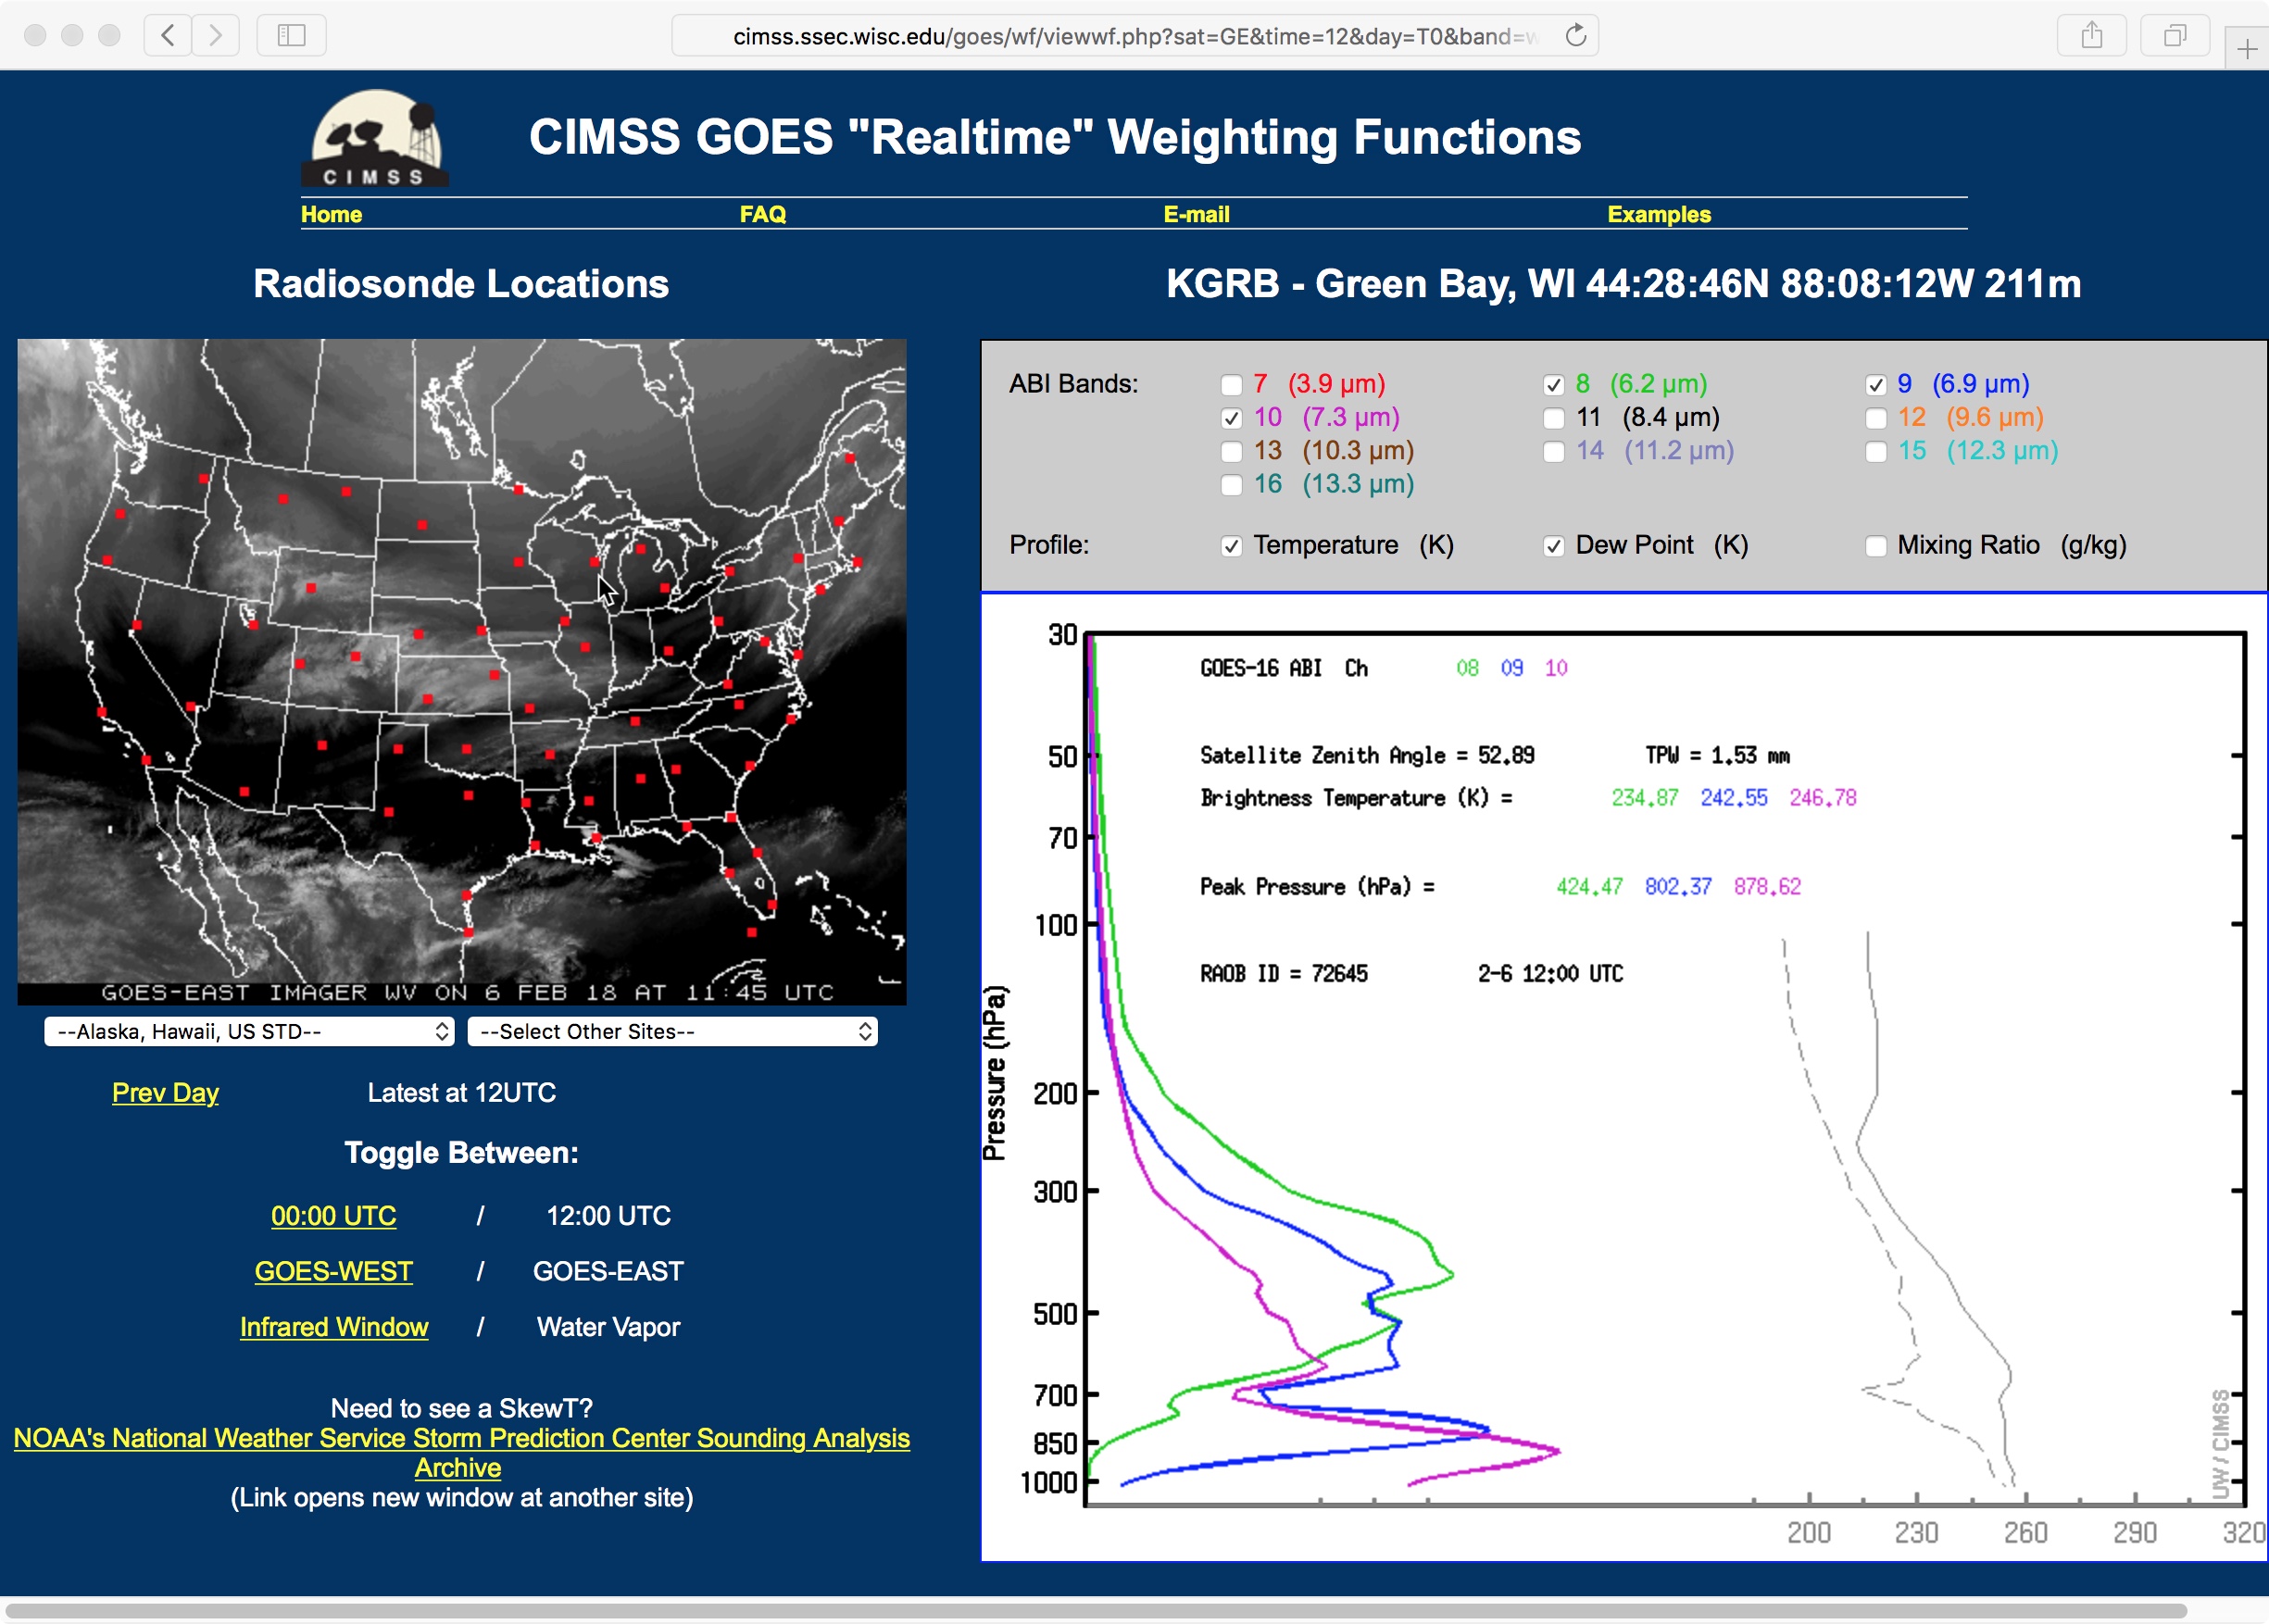 Weighting function plots for the three GOES-16 Water Vapor bands, calculated using rawinsonde data from Green Bay, Wisconsin [click to enlarge]